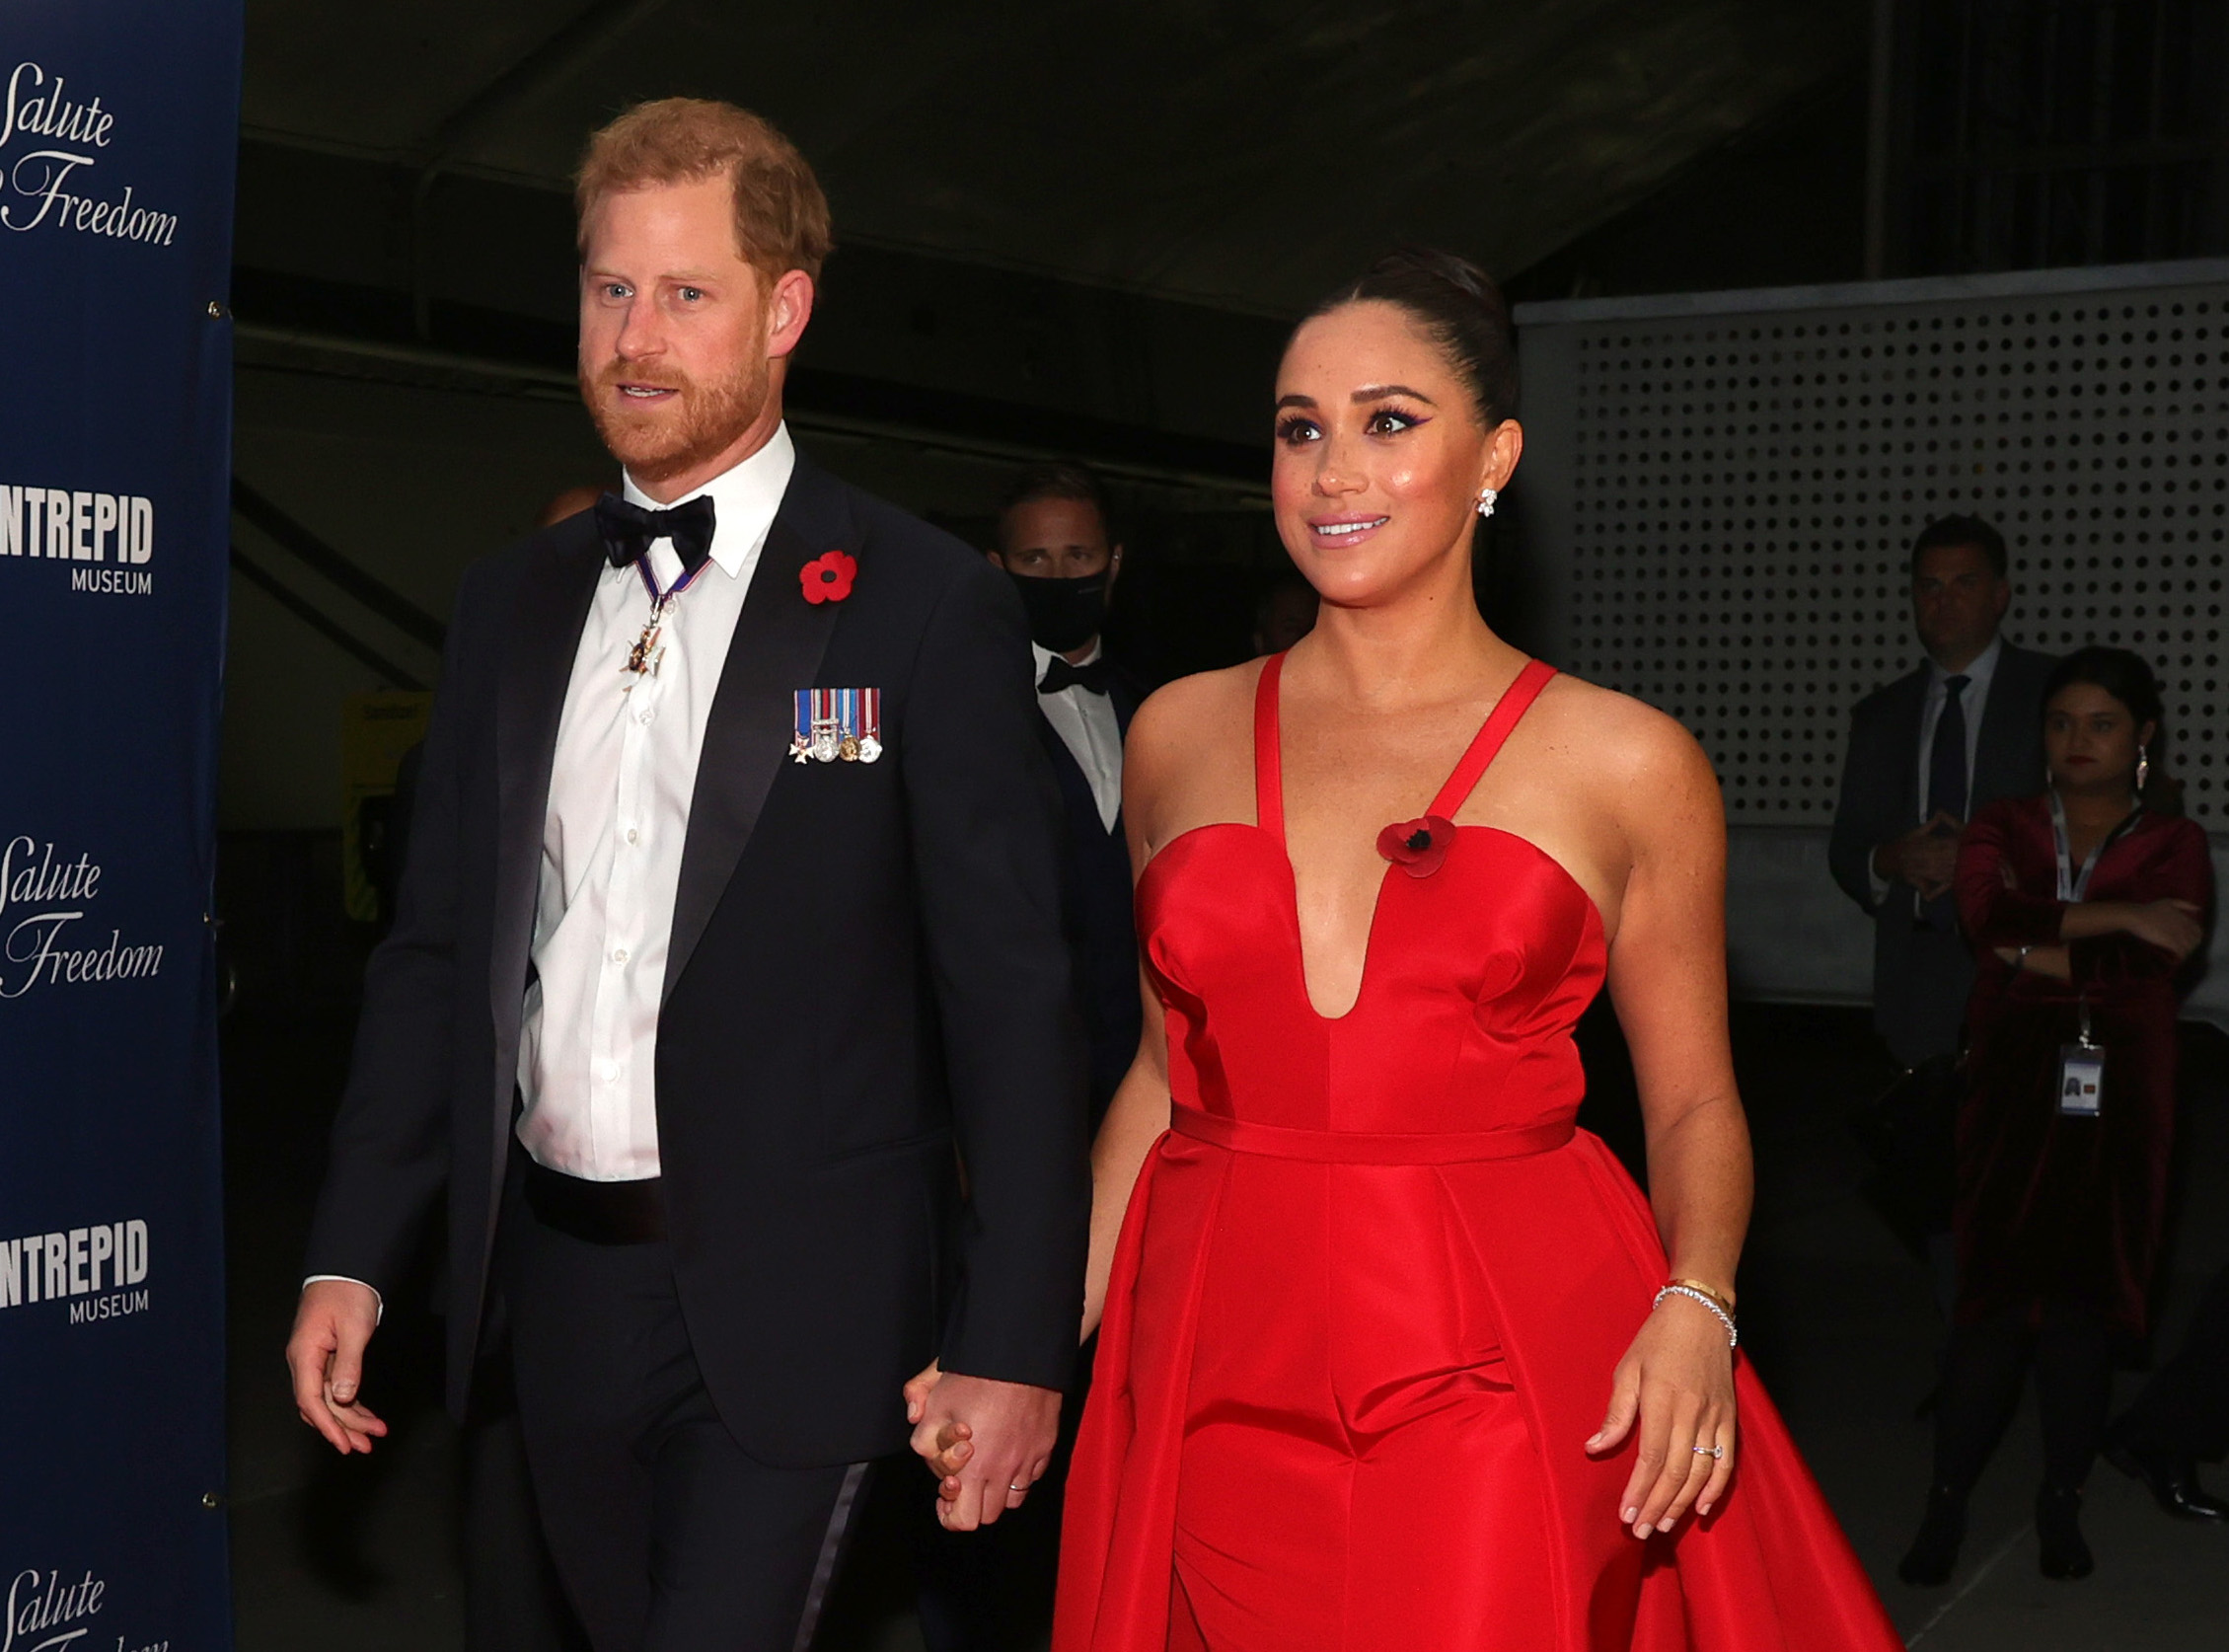 Prince Harry and Meghan Tour by Thomas Markle's Friend Sparks Outrage